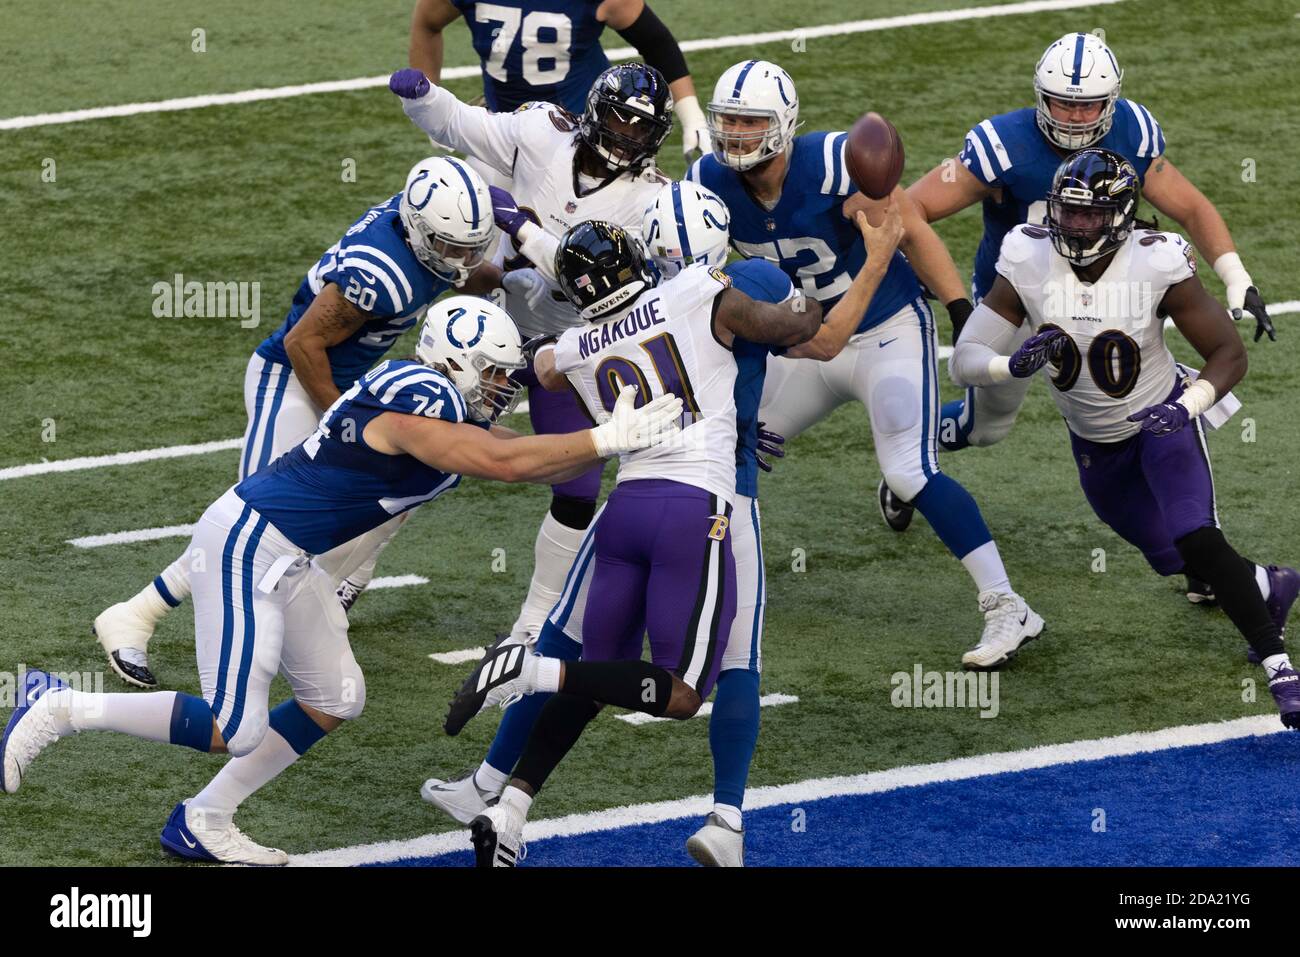 Indianapolis, Indiana, USA. 8th Nov, 2020. Indianapolis Colts quarterback Philip Rivers (17) is hit as he throws the ball during the game between the Baltimore Ravens and the Indianapolis Colts at Lucas Oil Stadium, Indianapolis, Indiana. Credit: Scott Stuart/ZUMA Wire/Alamy Live News Stock Photo